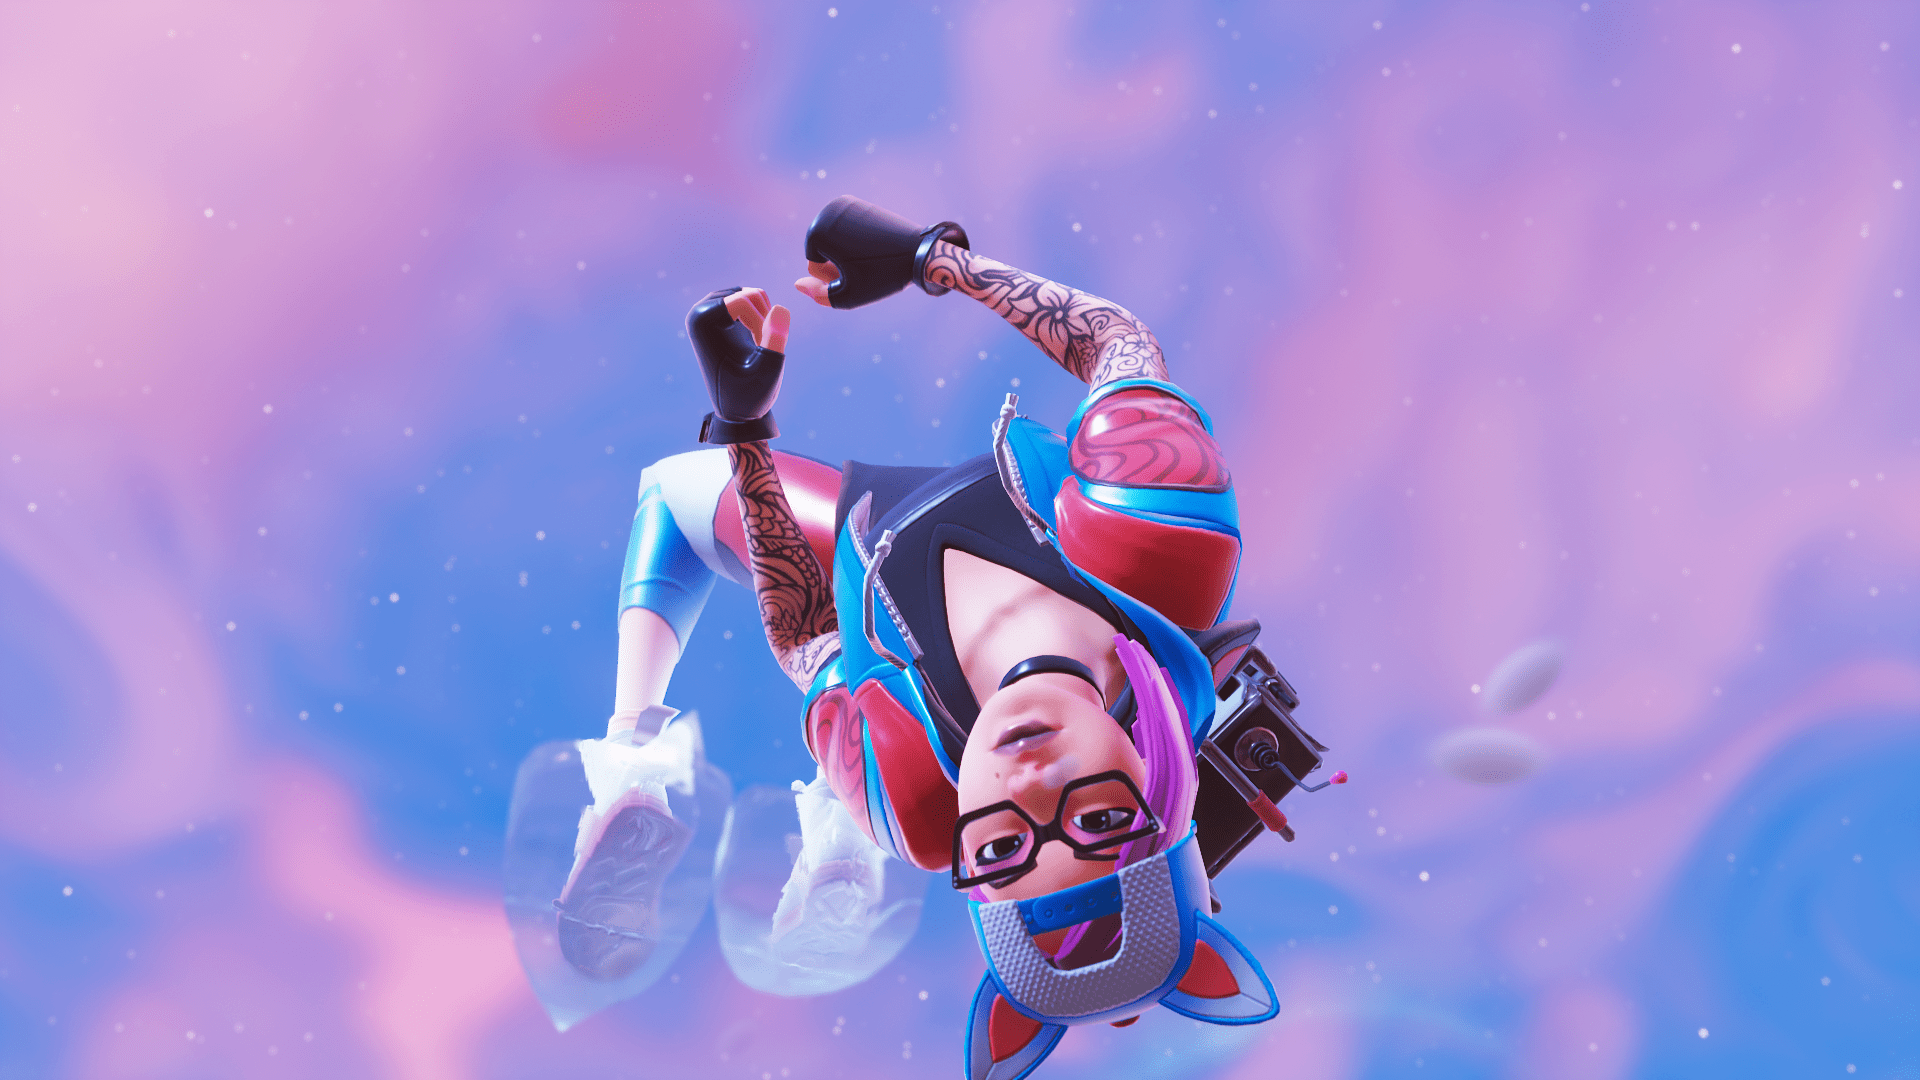 A 3D render of a cyberpunk character in a space suit, floating in a pink and blue, starry background - Fortnite